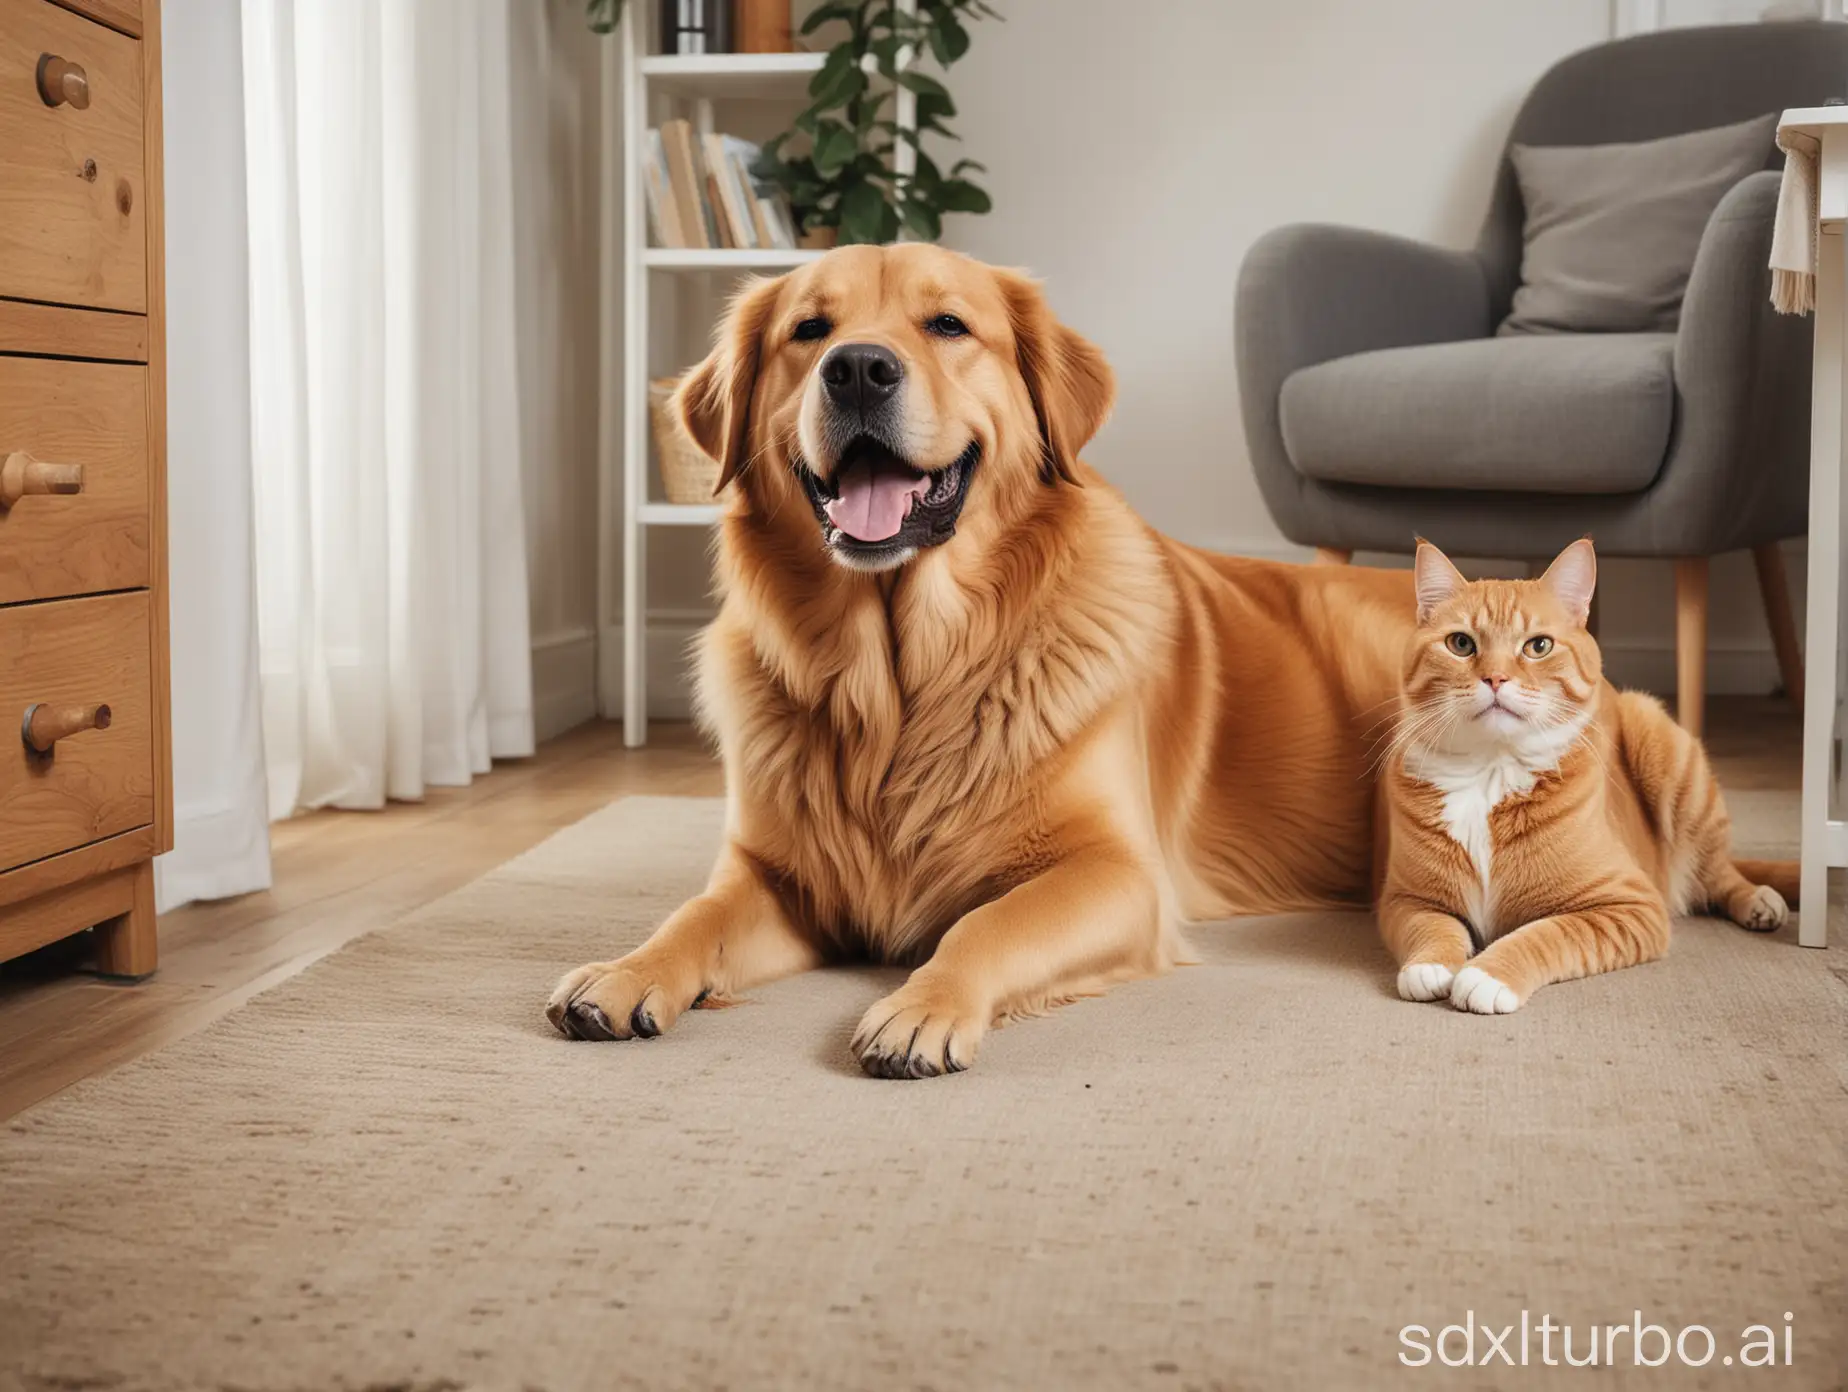 A big happy dog next to a happy cat on the floor of a cosy room